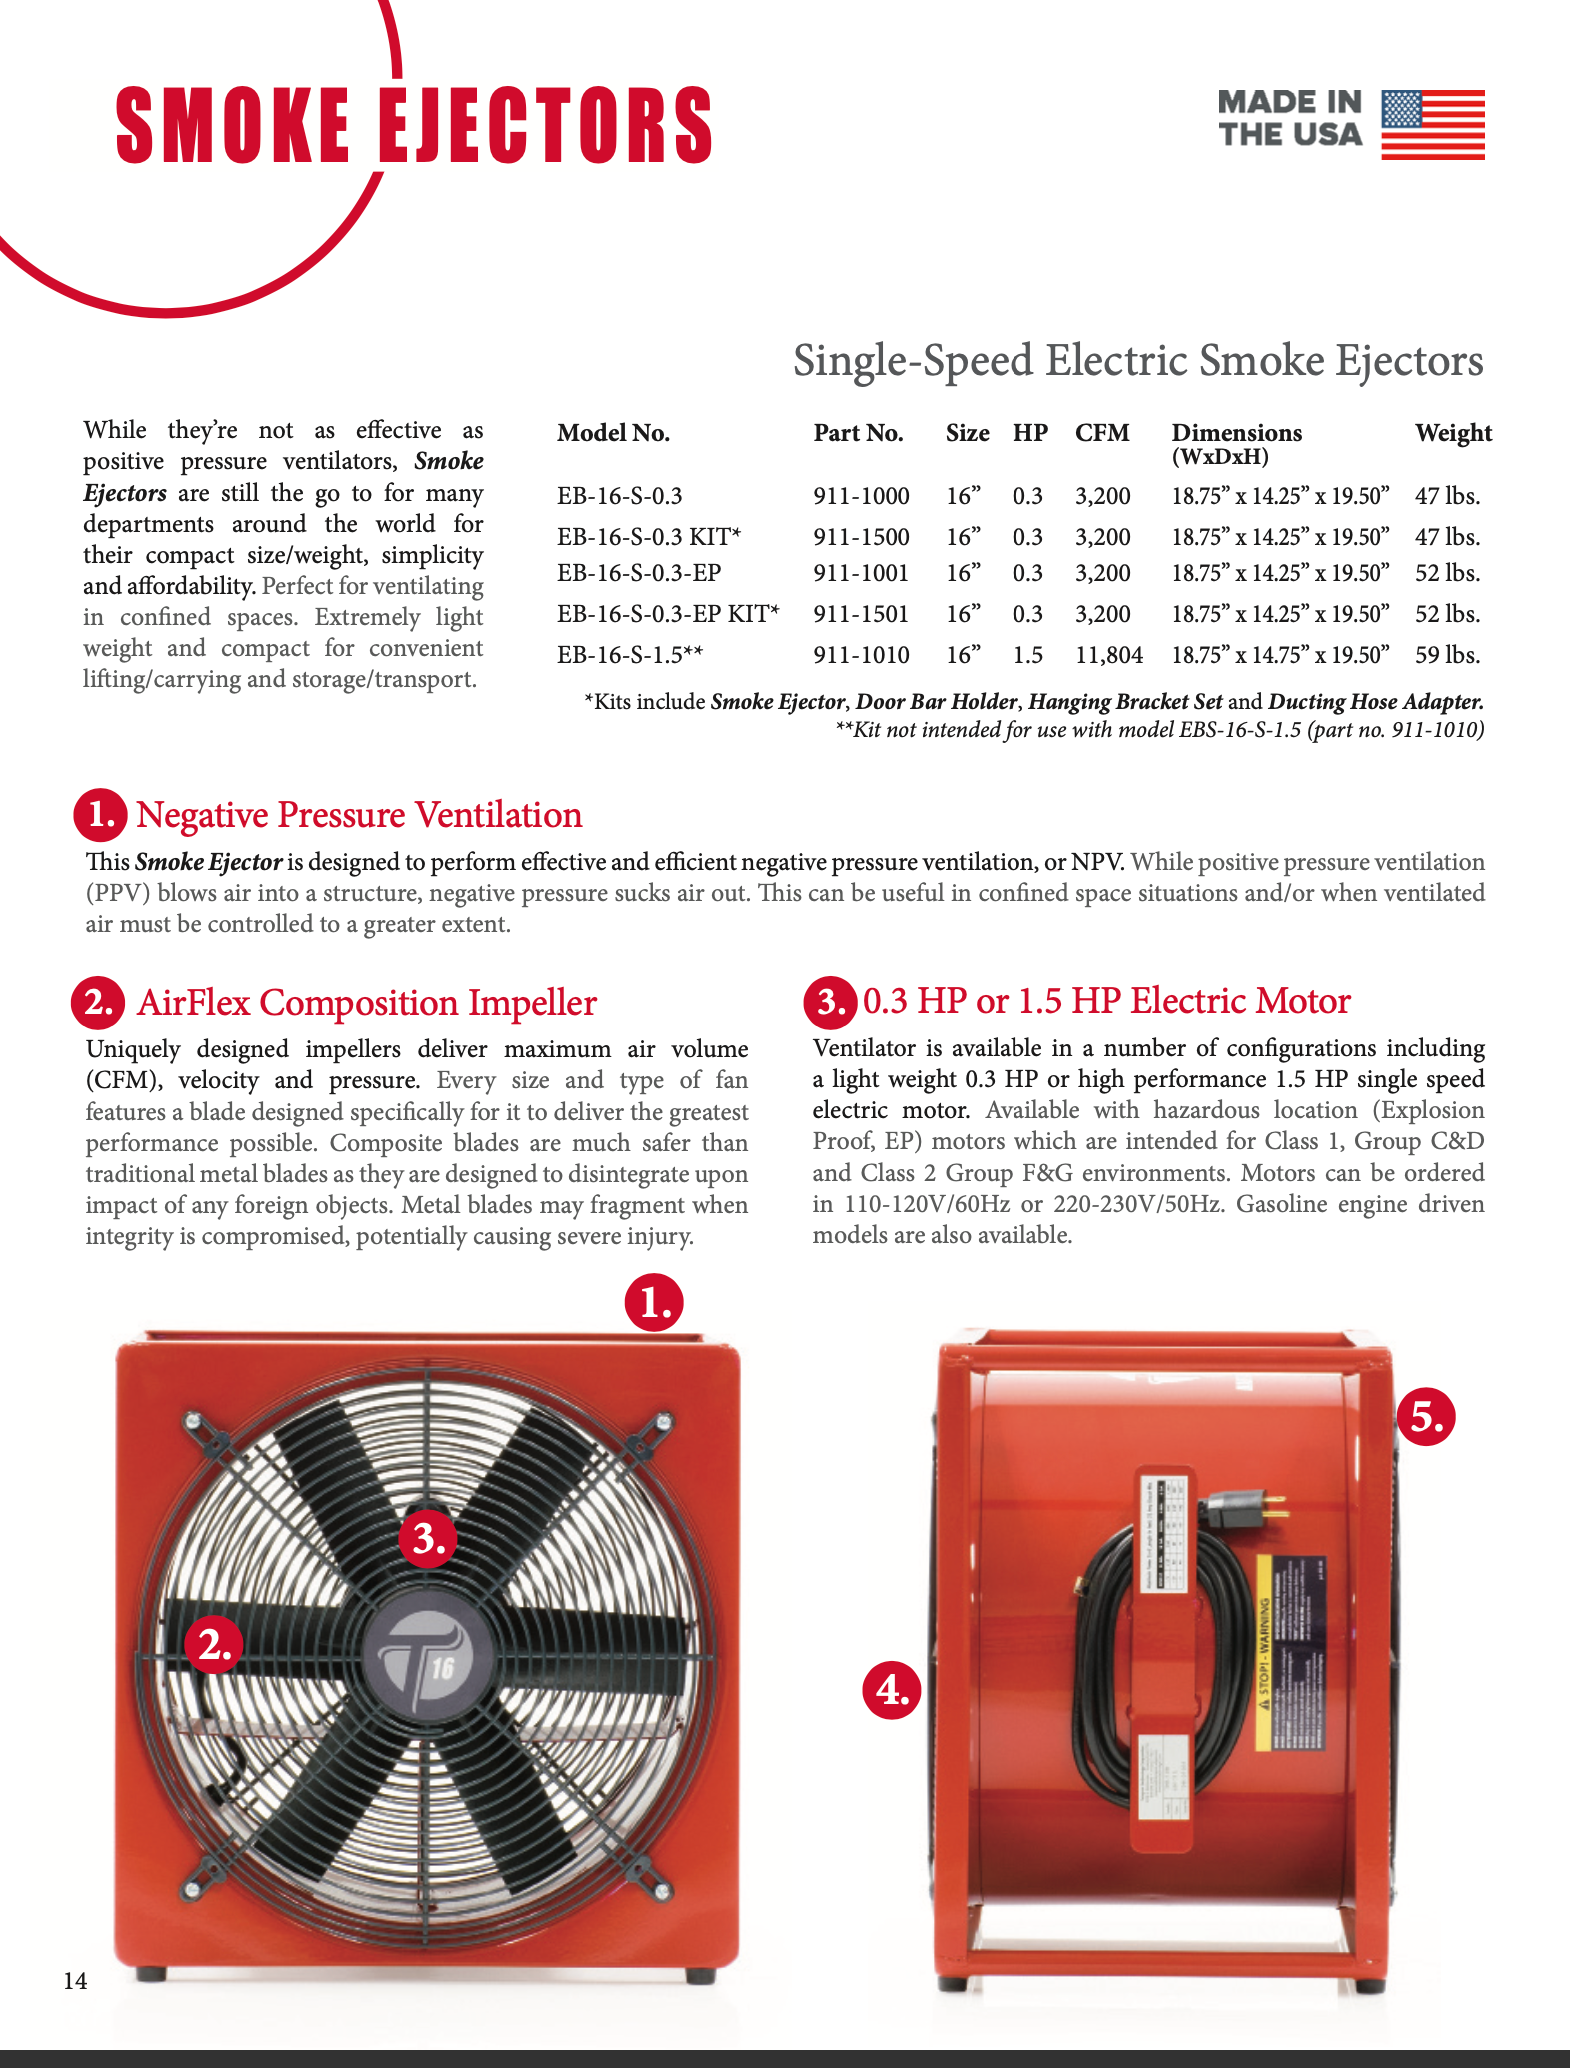 Firefighting Tools, Single-Speed 16 Electric Smoke Ejector